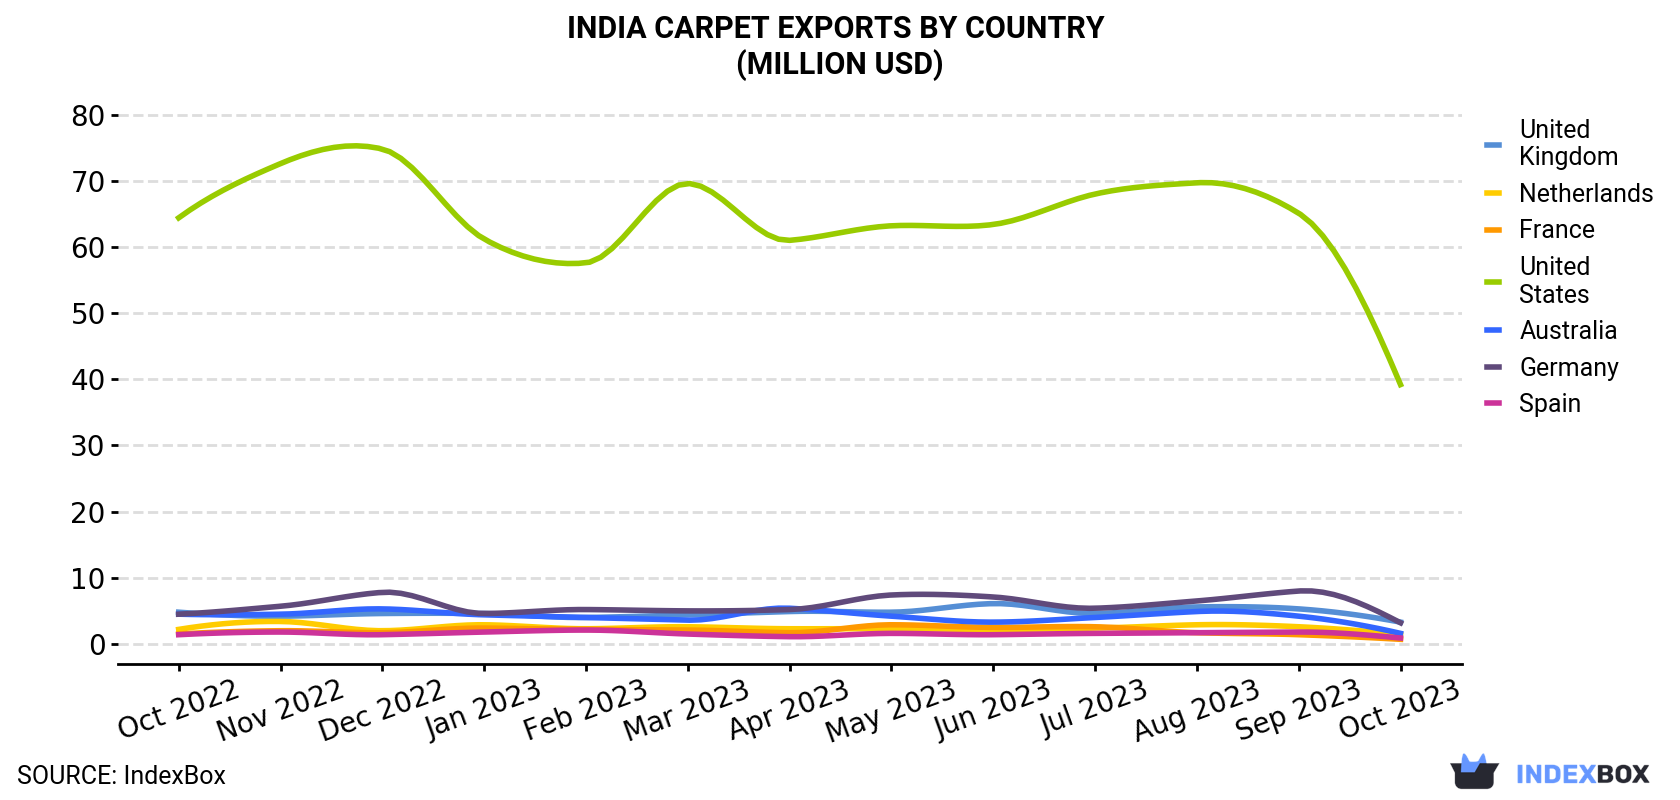 India Carpet Exports By Country (Million USD)